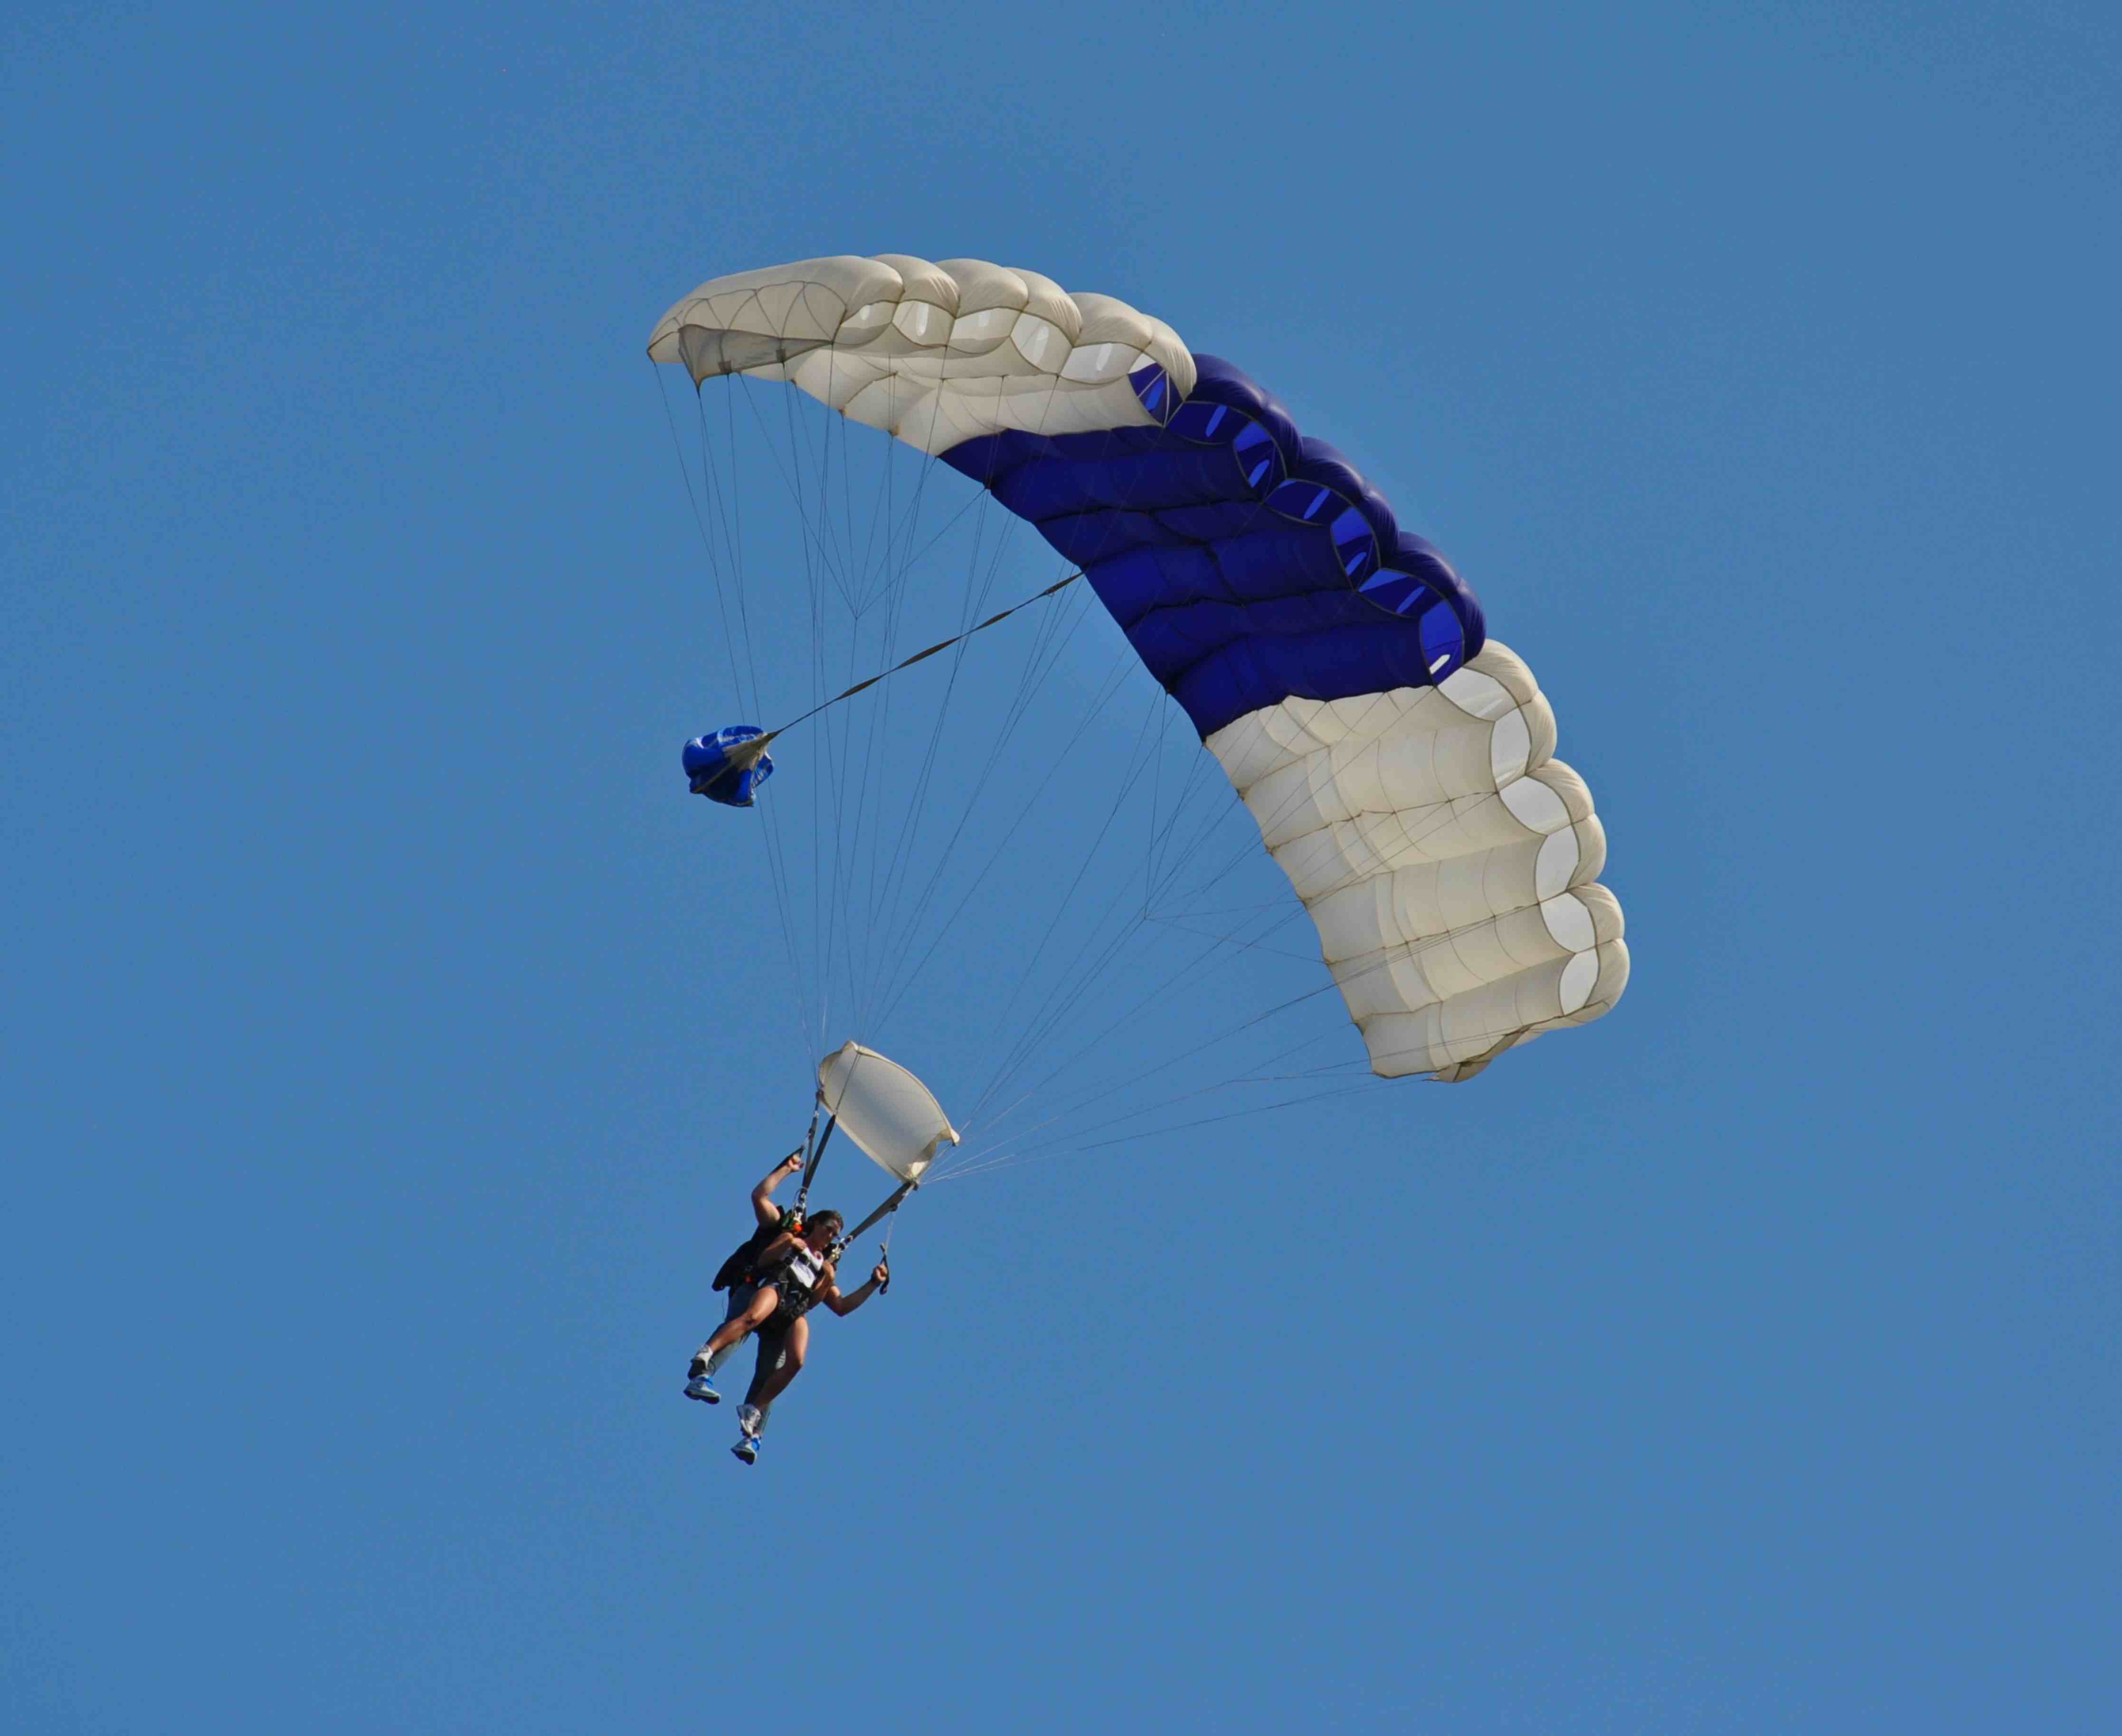 As with any extreme sport, there is a real risk of serious injury while skydiving.